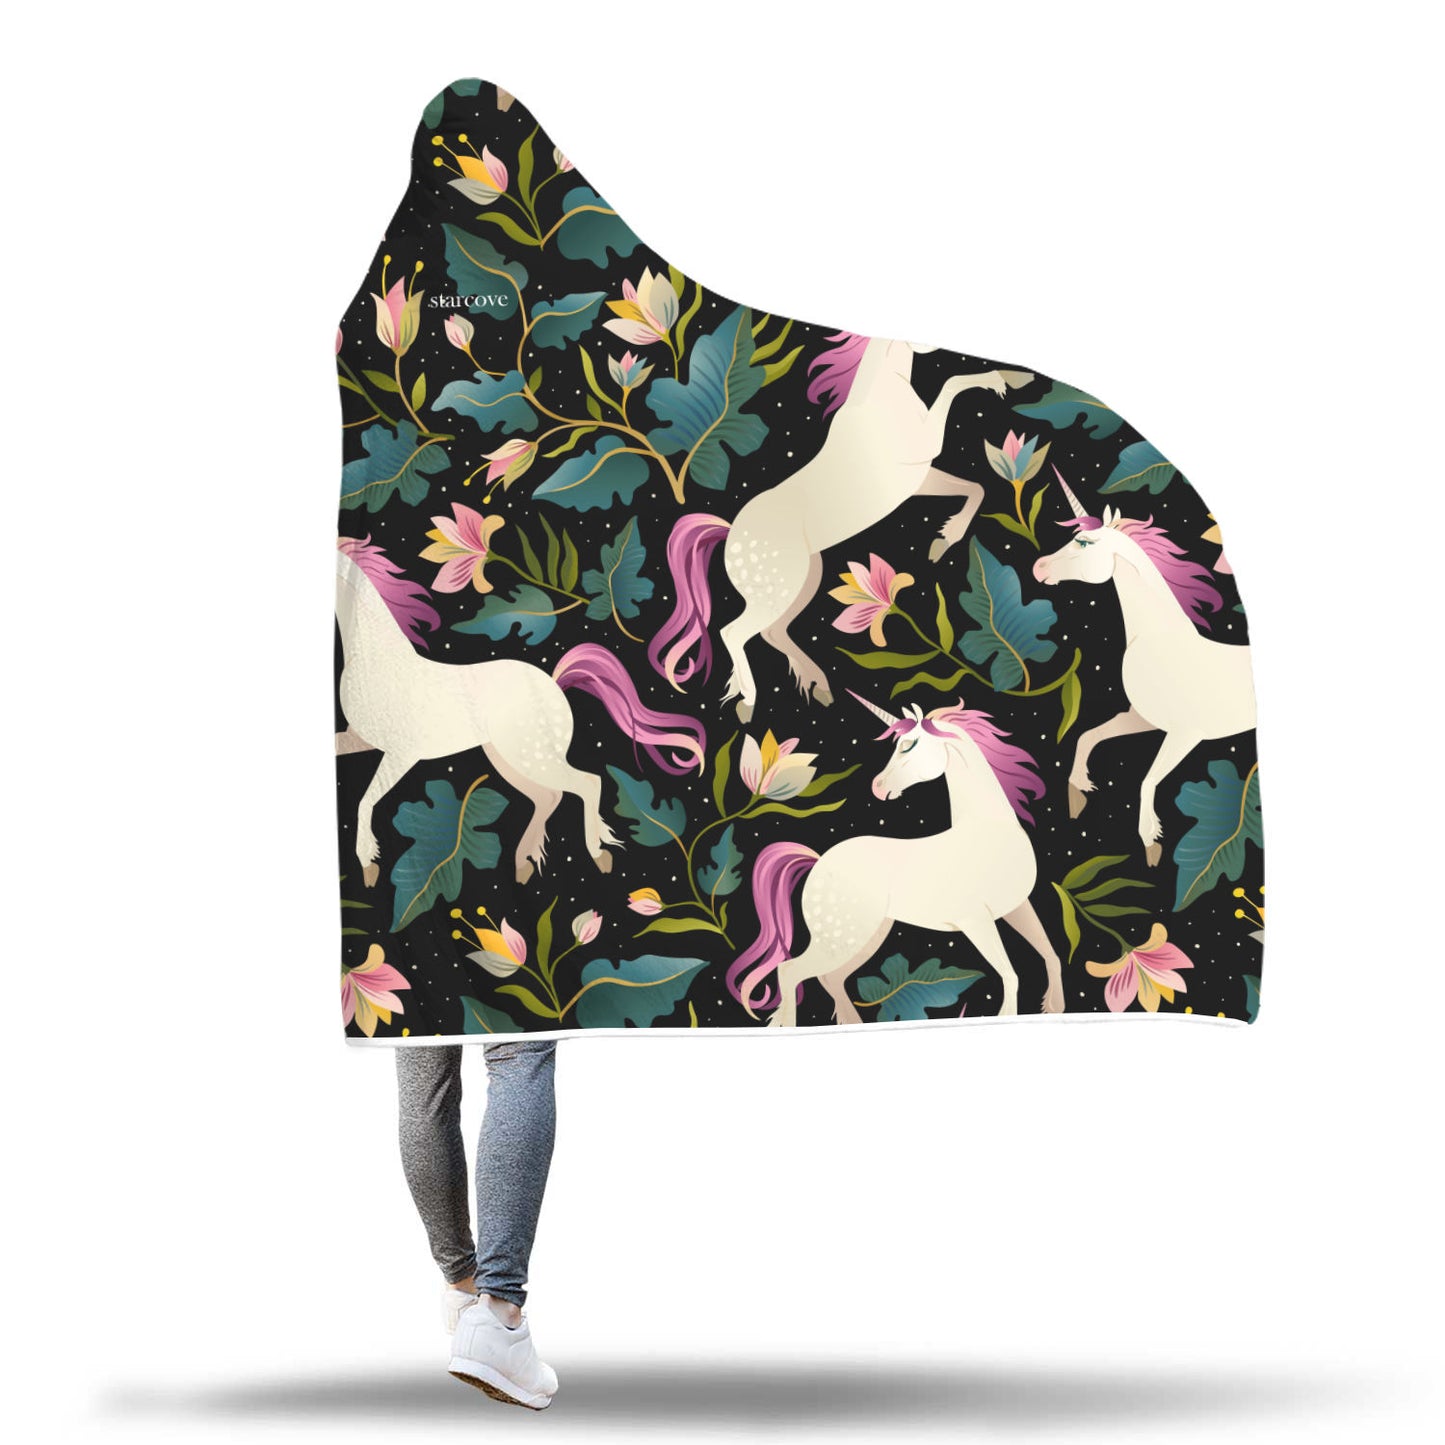 Unicorn Hooded Fleece Blanket with Soft Cozy Fluffy Sherpa Interior, Black Floral Adult Kids Wearable Cloak Wrap Winter Throw Gift Starcove Fashion